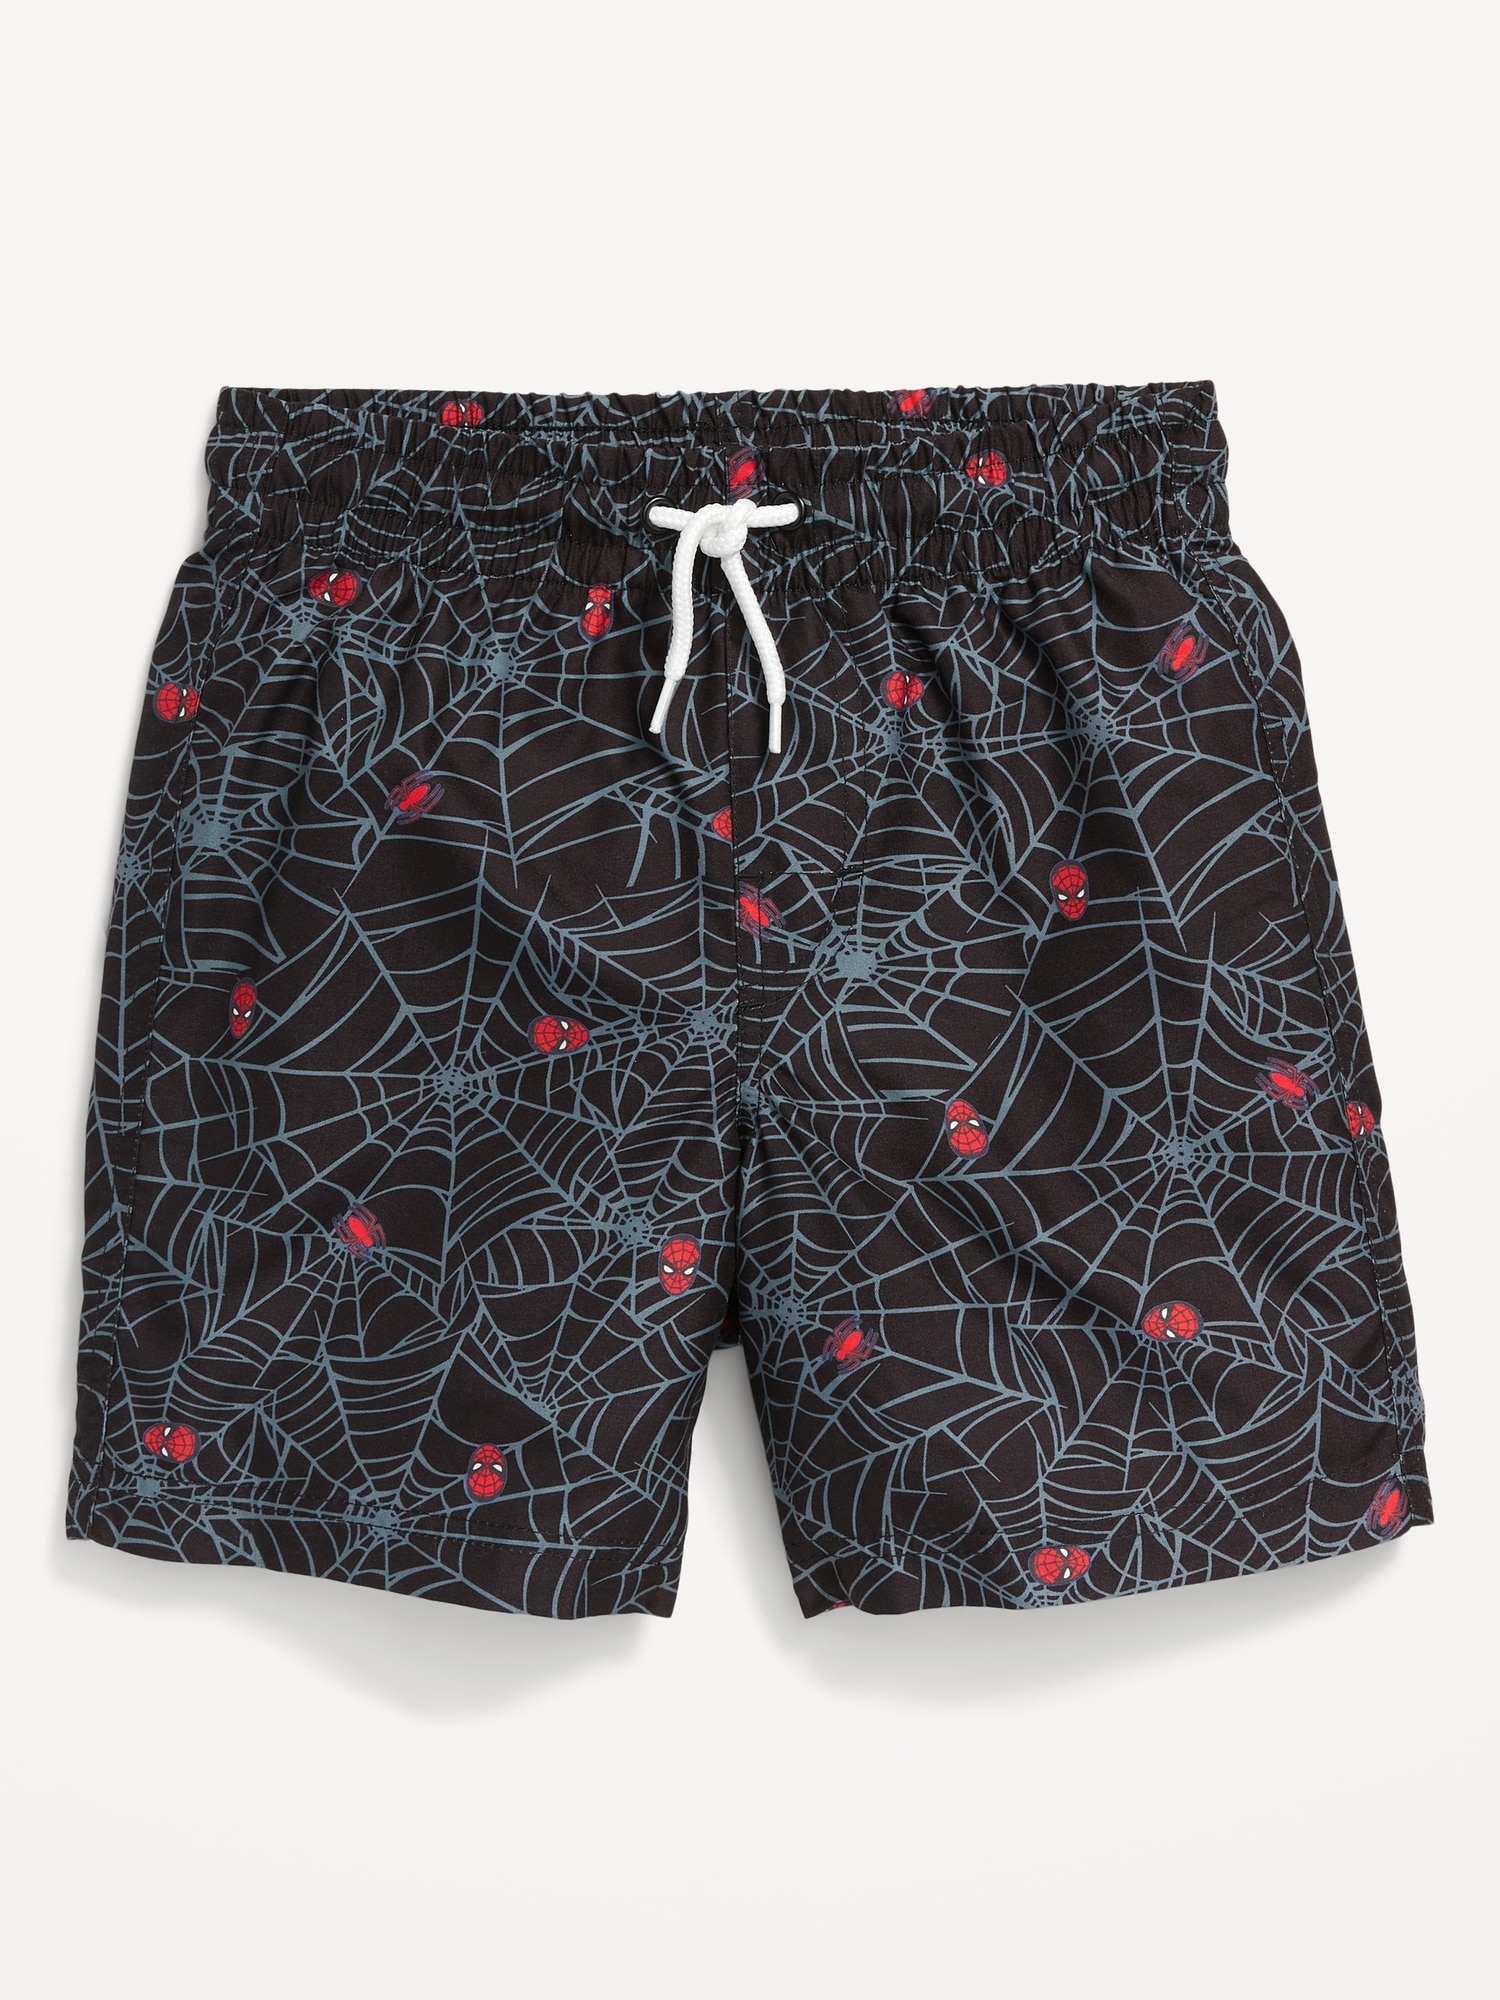 Old Navy Licensed Pop-Culture Graphic Swim Trunk for Boys multi. 1